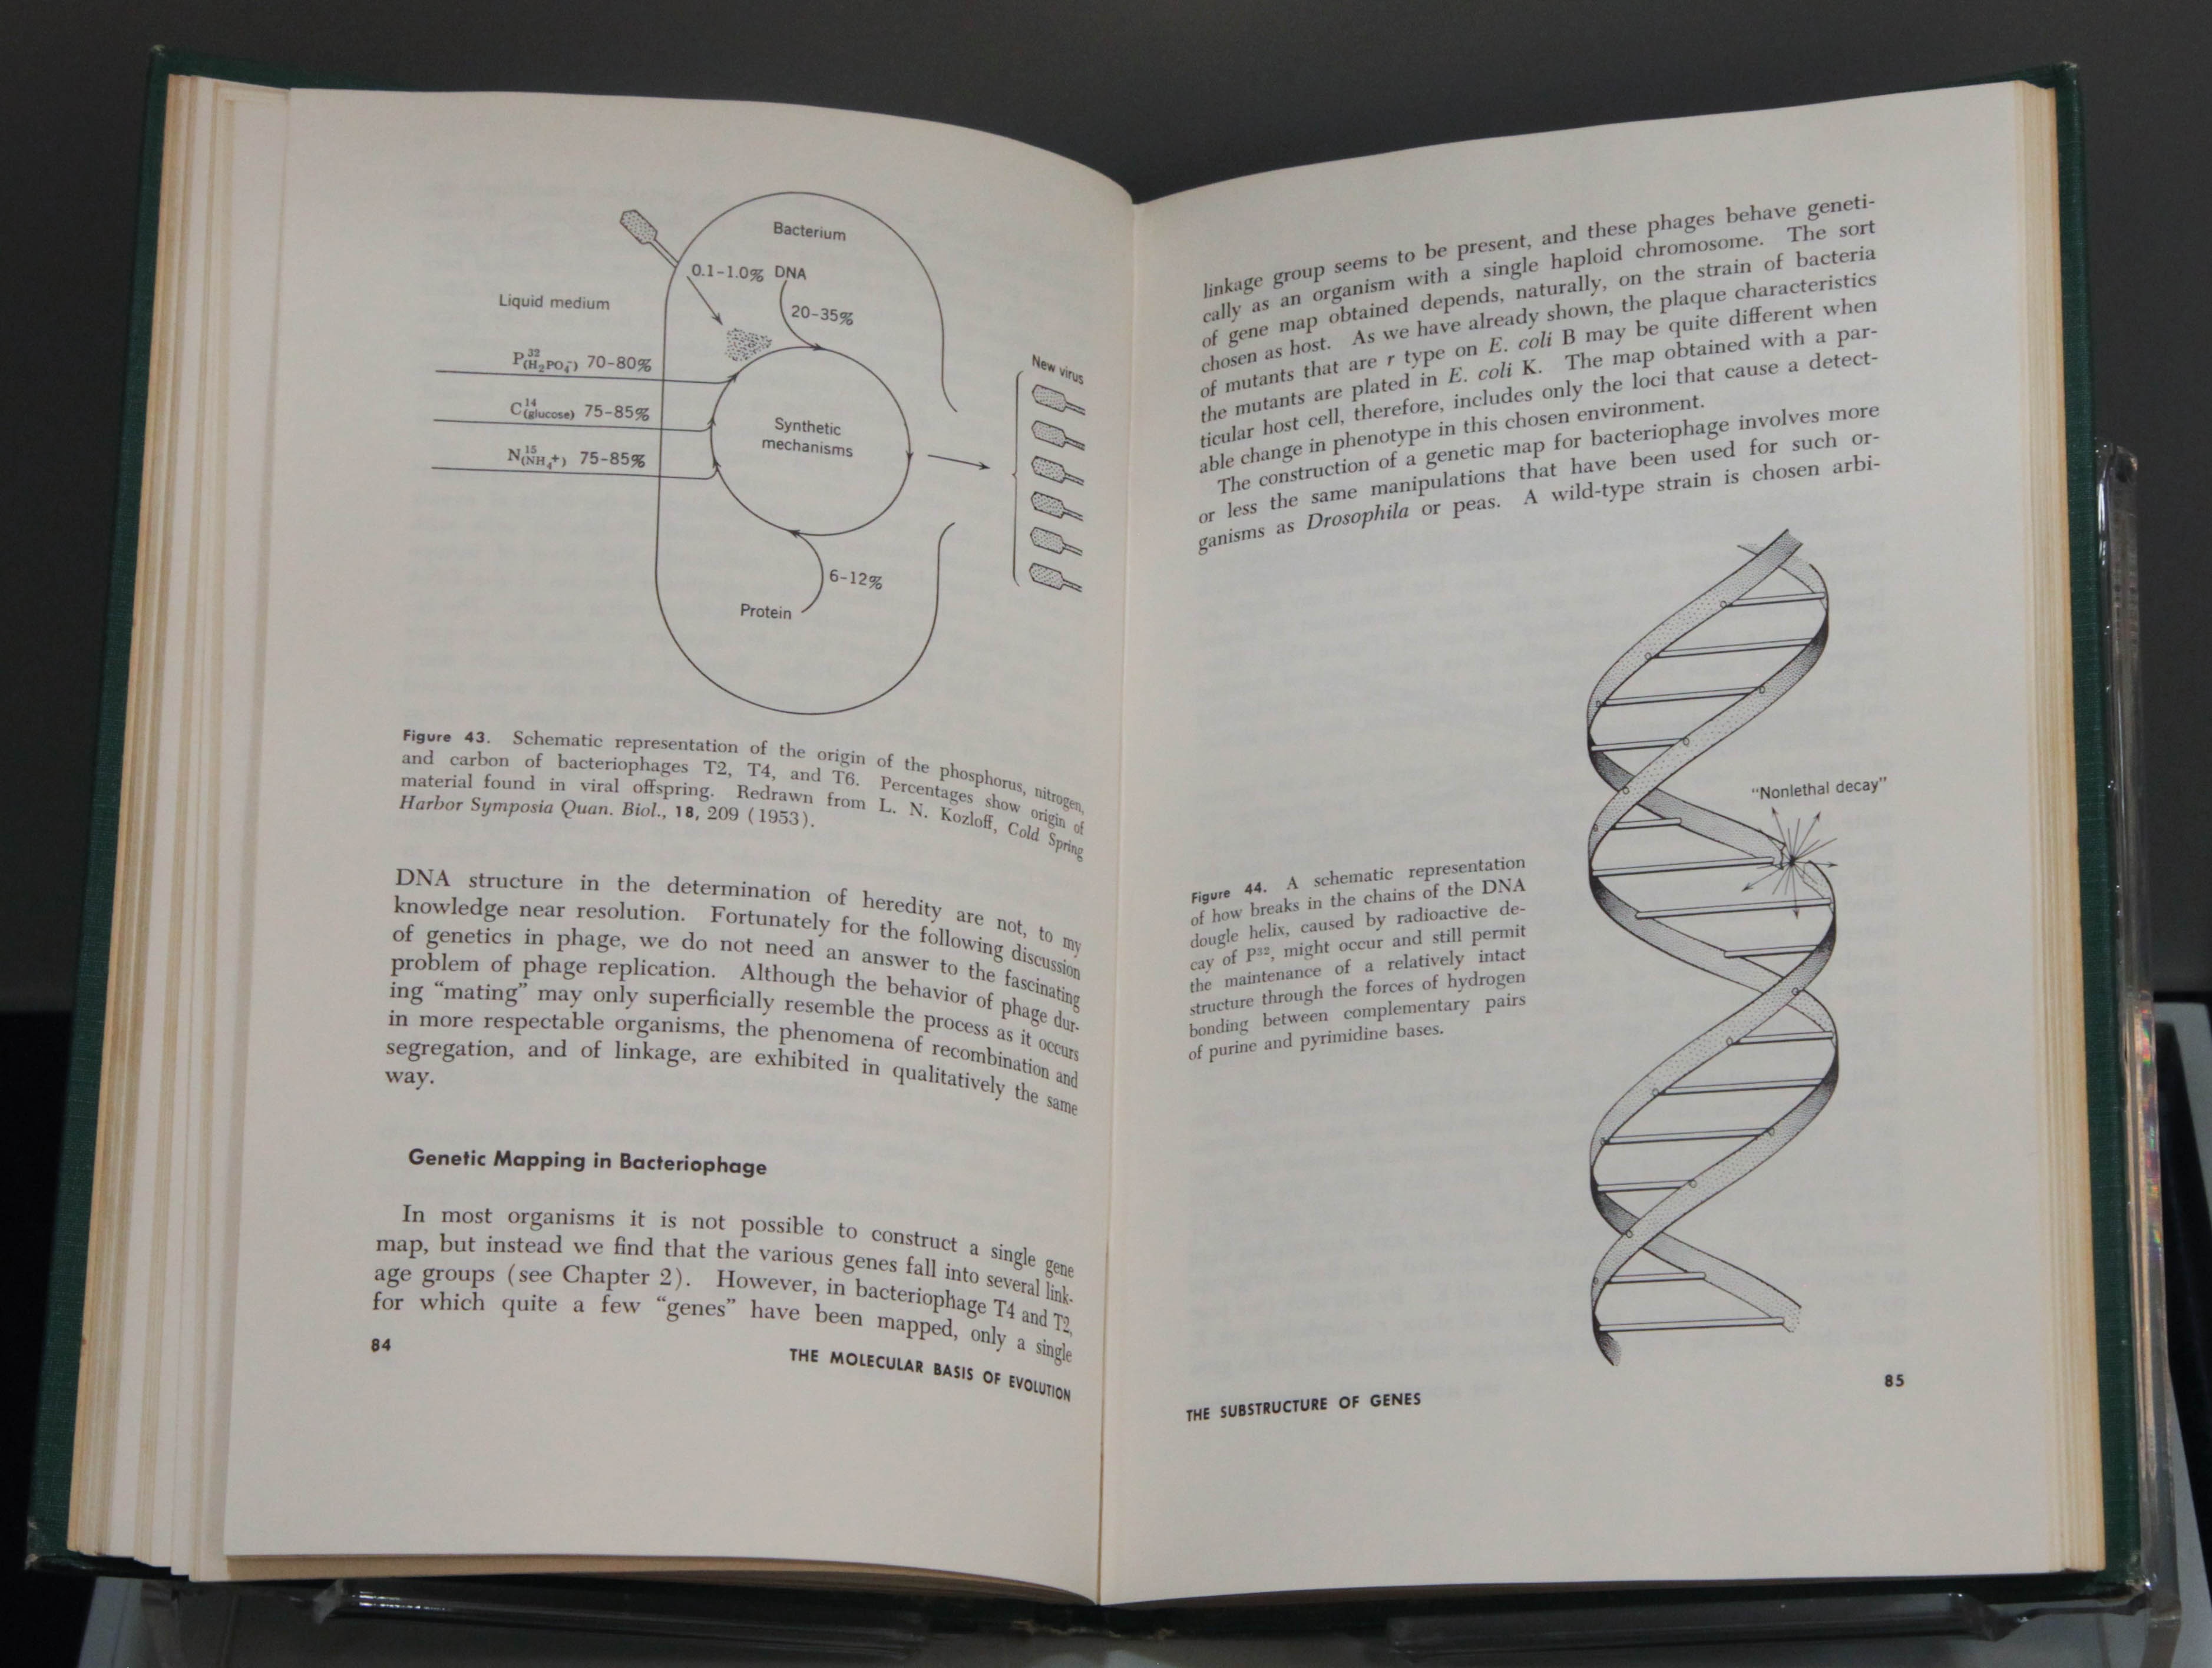 image of open book with DNA image